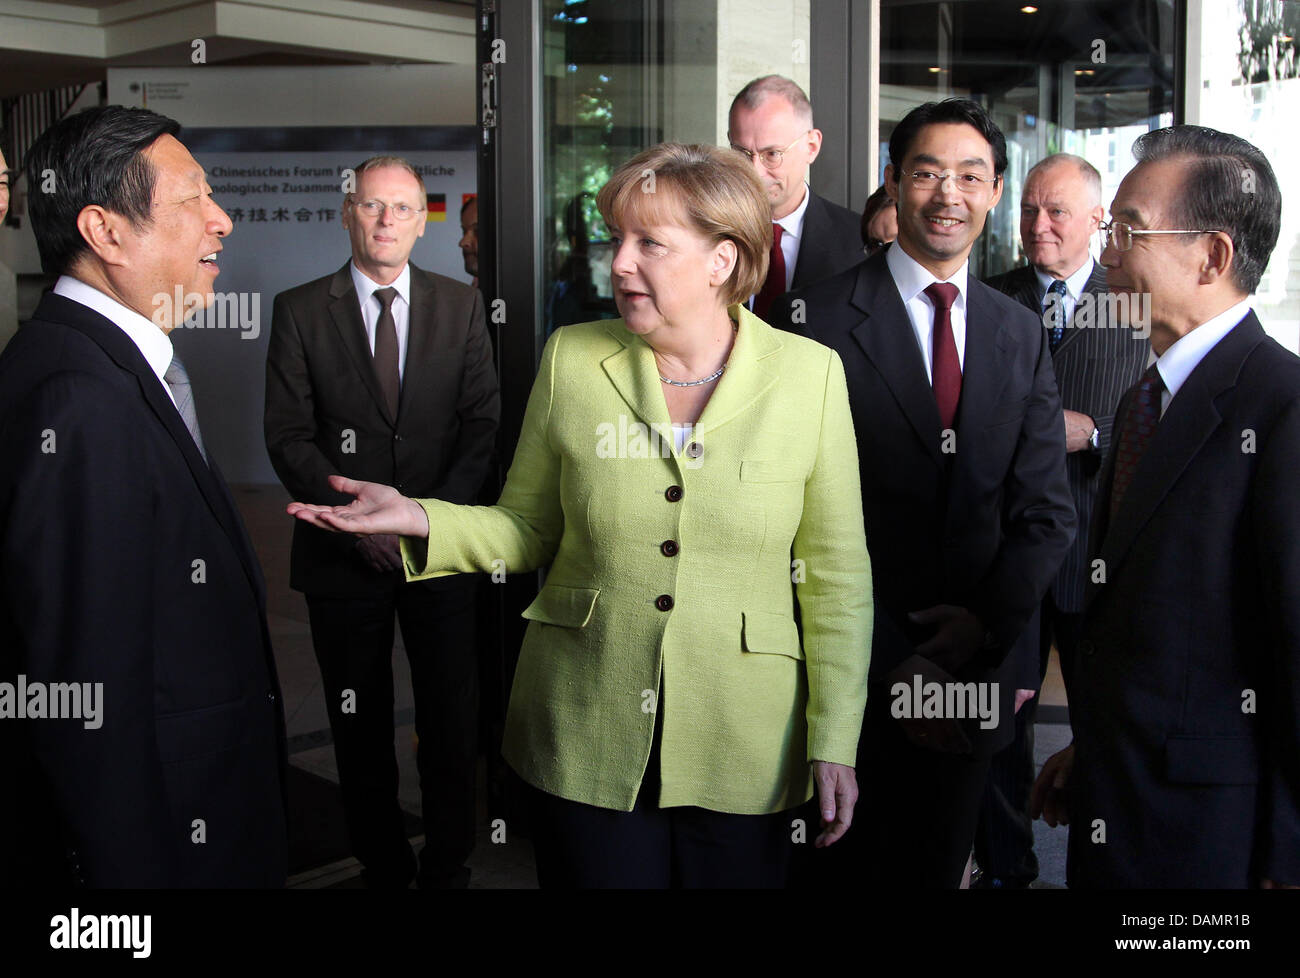 German Minister for Economic Affairs Philipp Roesler (2-r) and German Chancellor Angela Merkel (m) receive the Chinese Minister for Economic Affairs Zhang Ping (l) and Chinese Prime Minister Wen Jiabao (r) at a hotel in Berlin, Germany, 28 June 2011. The politicians will take part in the first German and Chinese government consultations and attend the 6th seminar of the German and  Stock Photo